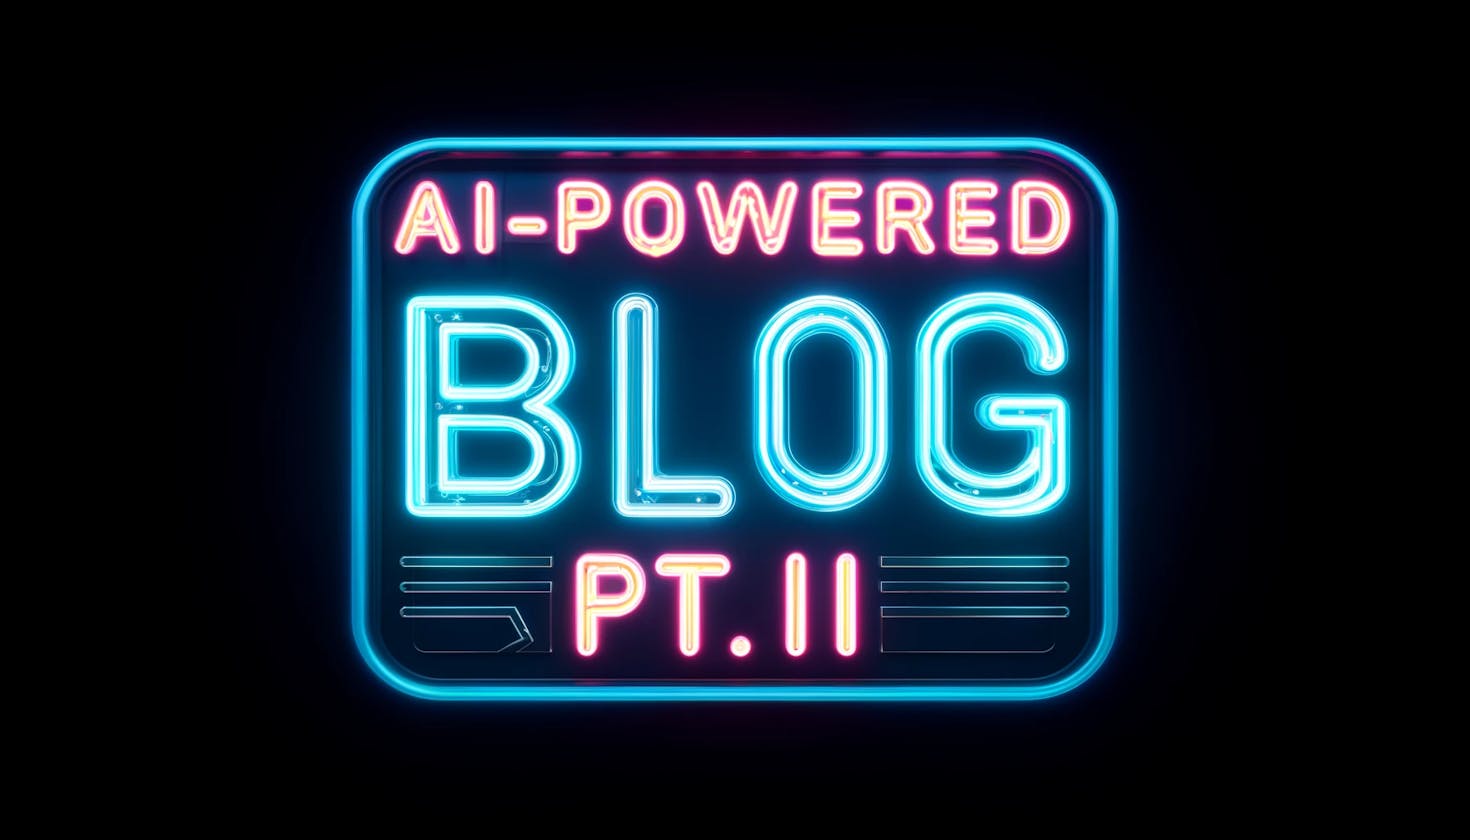 I'm Building an AI-Powered Blog: Here's How...